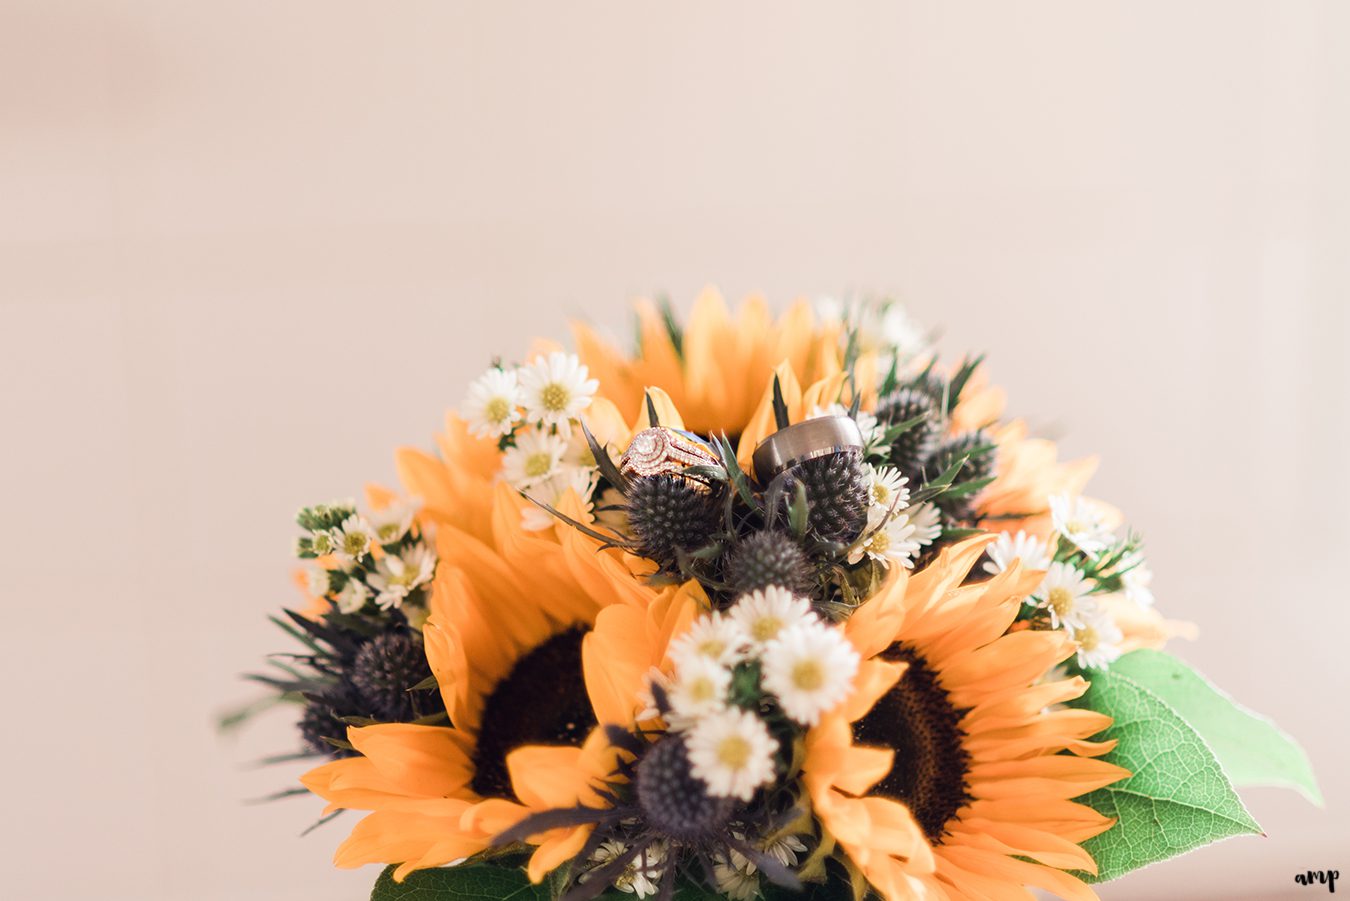 Courtnee's bouquet with sunflowers and blue thistle